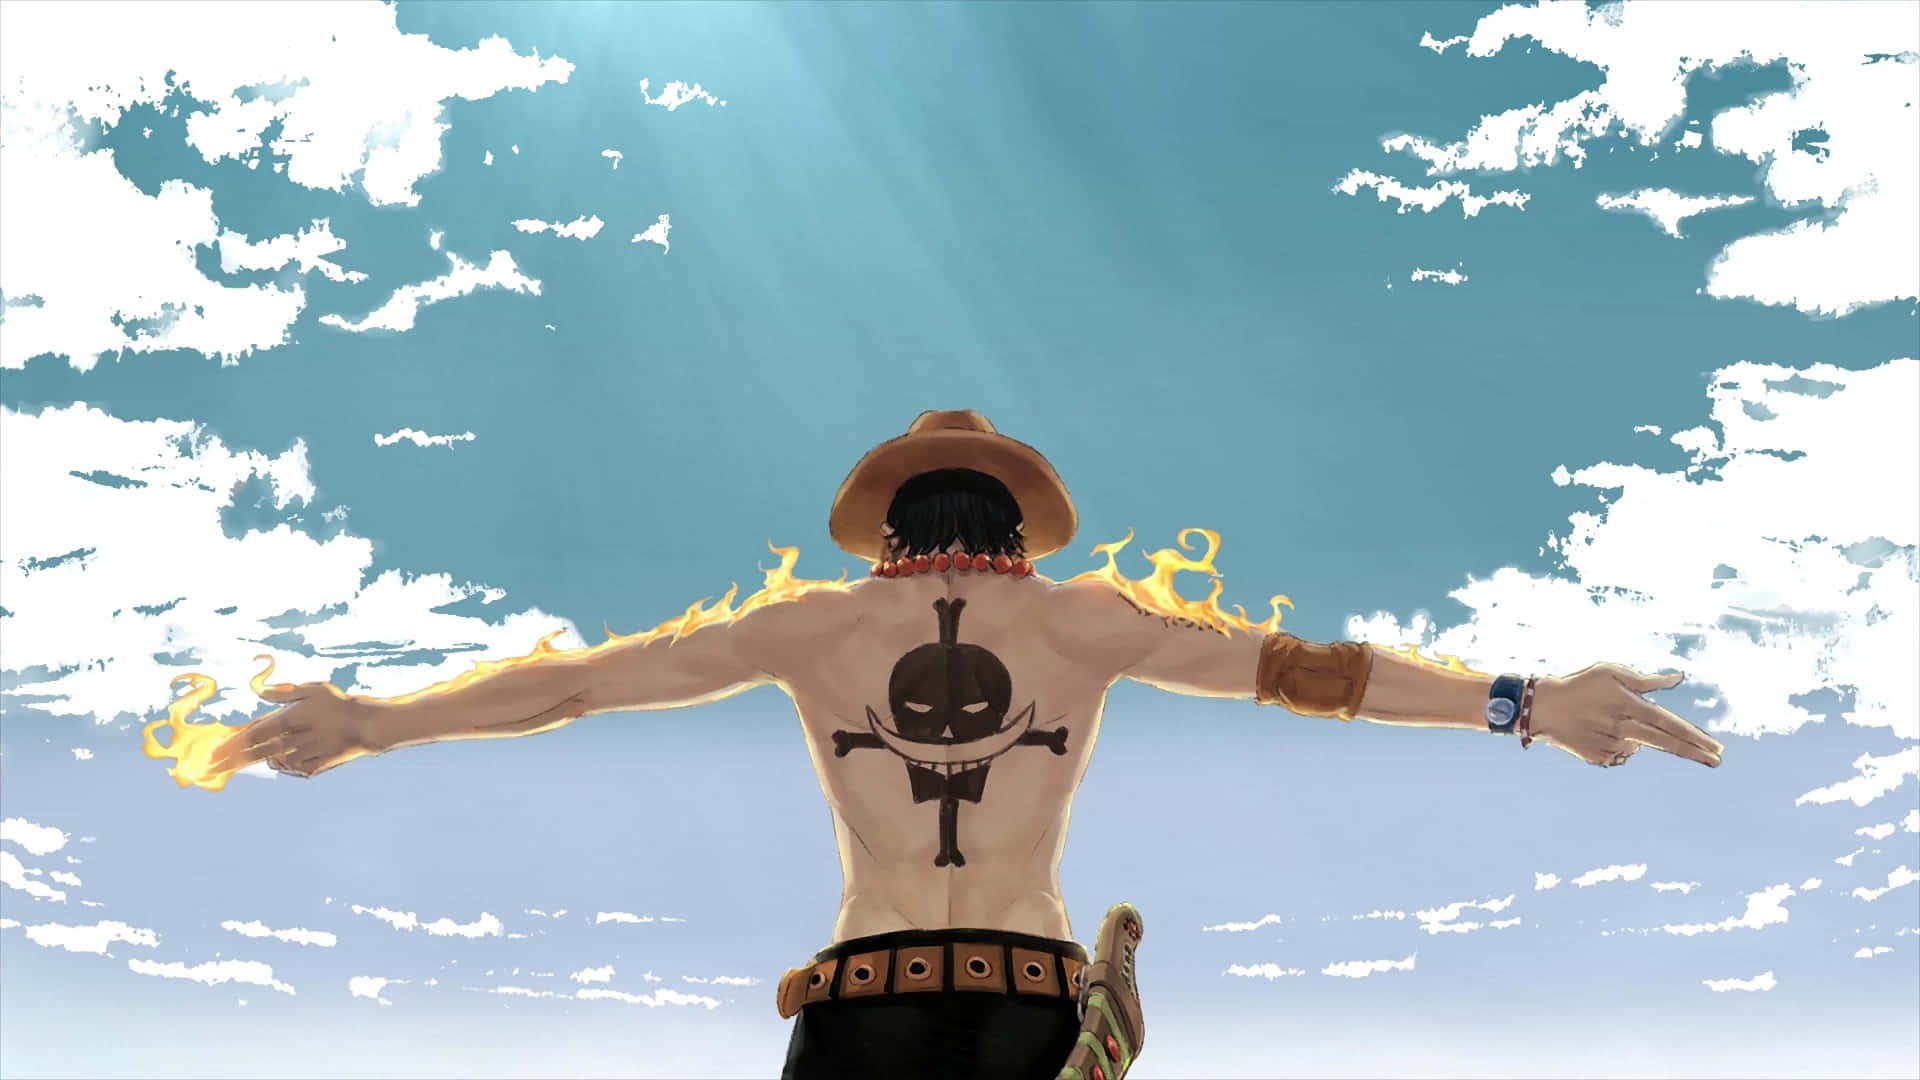 Portgas D. Ace, The Strongest Member Of Whitebeard's Pirate Crew